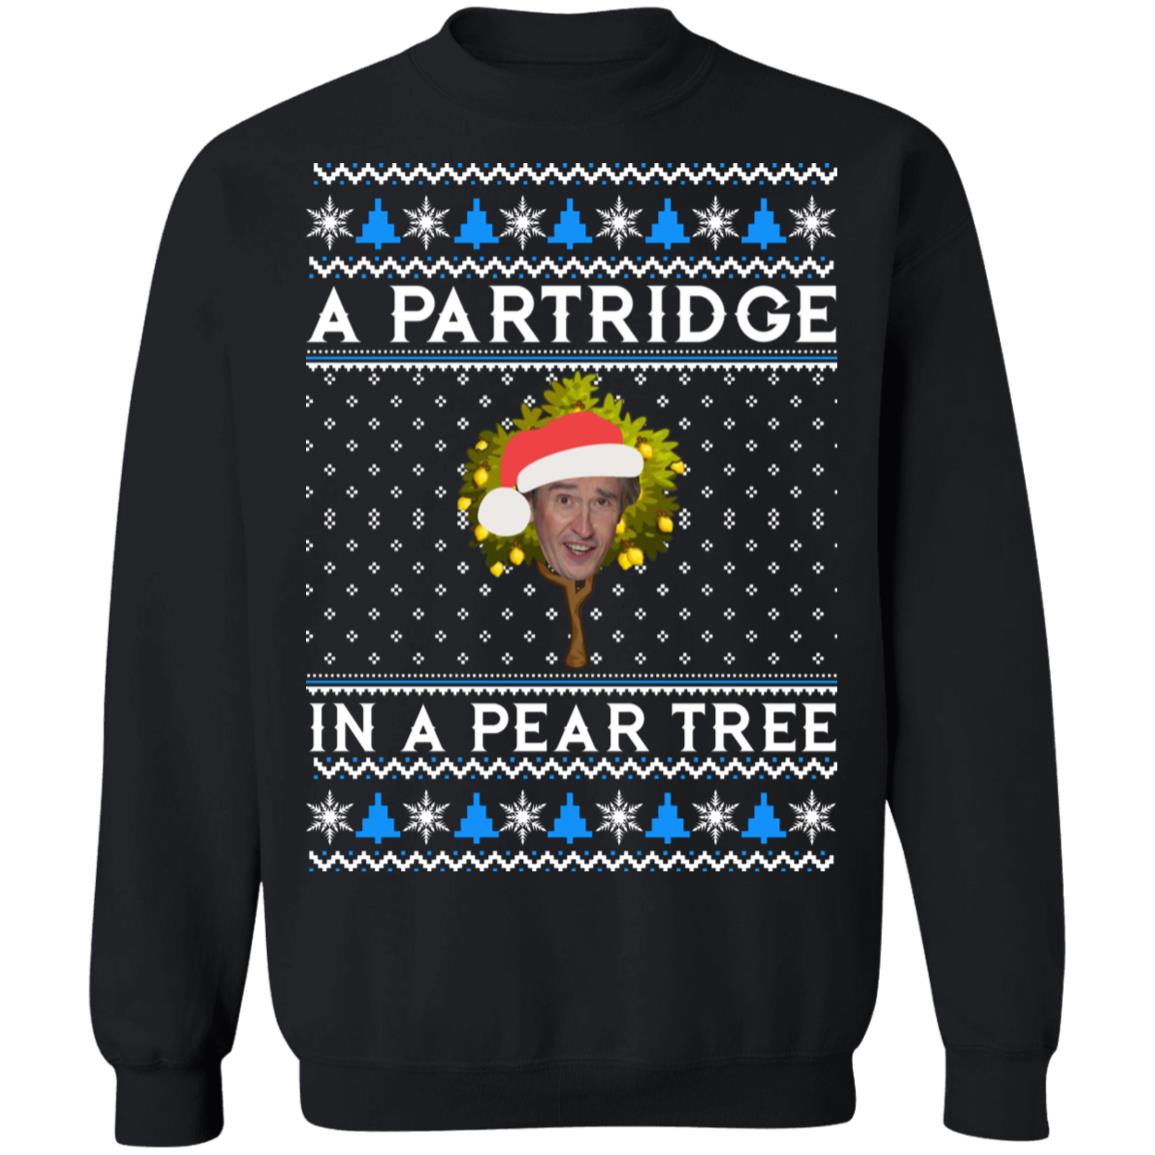 Alan Partridge In A Pear Tree Christmas Sweater